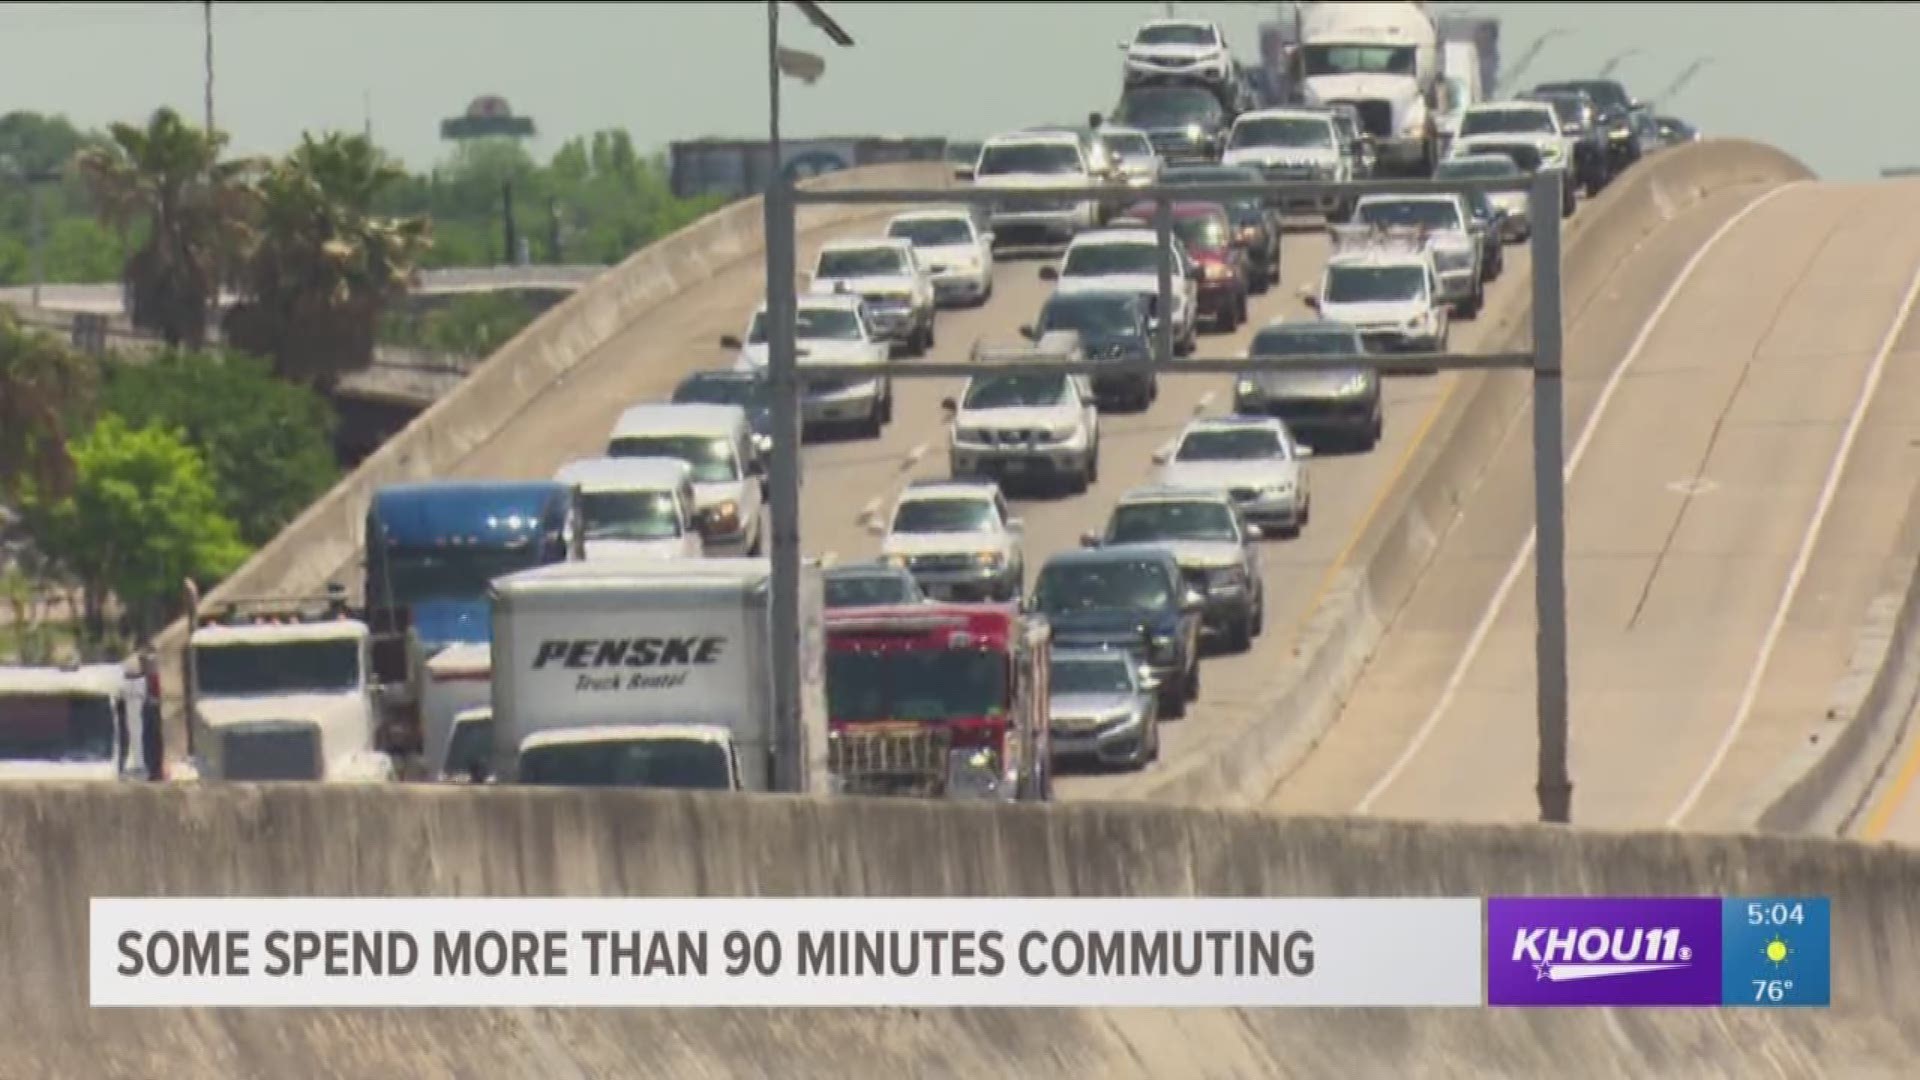 Houston's horrible traffic is nothing new for people who commute in and around the city every day. For a small group that drive is almost unbearable.